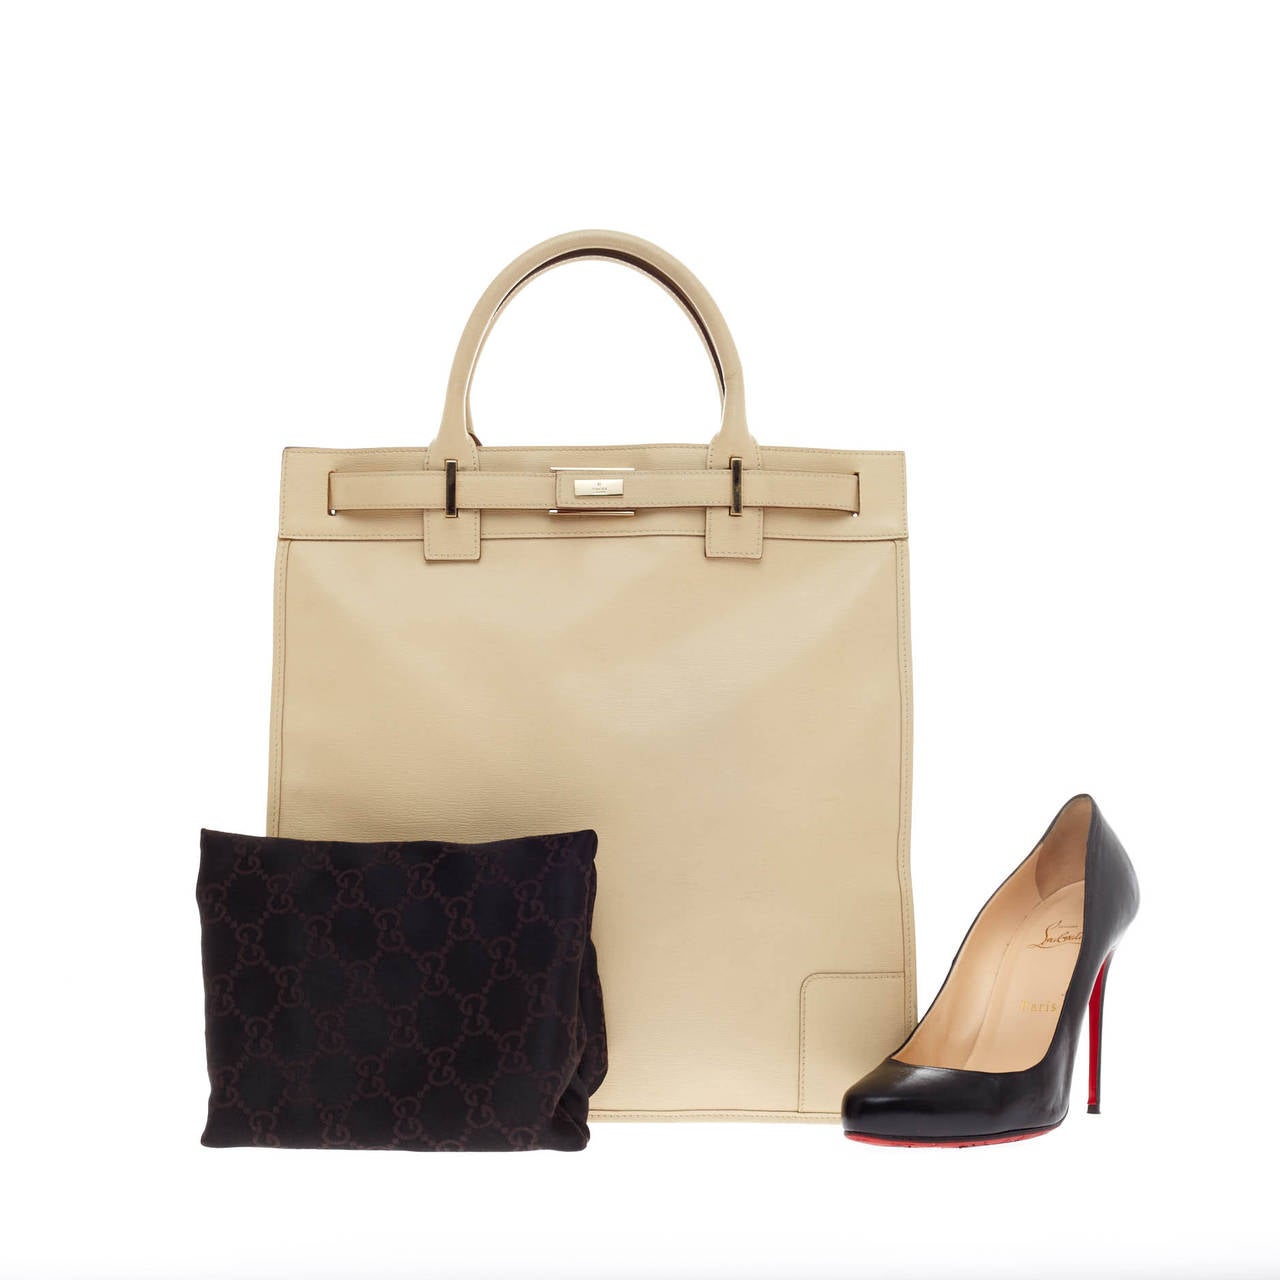 This authentic Gucci Vertical Tote Leather is the perfect neutral tote for daily use. Crafted in creme leather, this tote features a simple, structured sillhouette, dual-rolled top handles and silver-tone hardware accents. Its press-lock closure